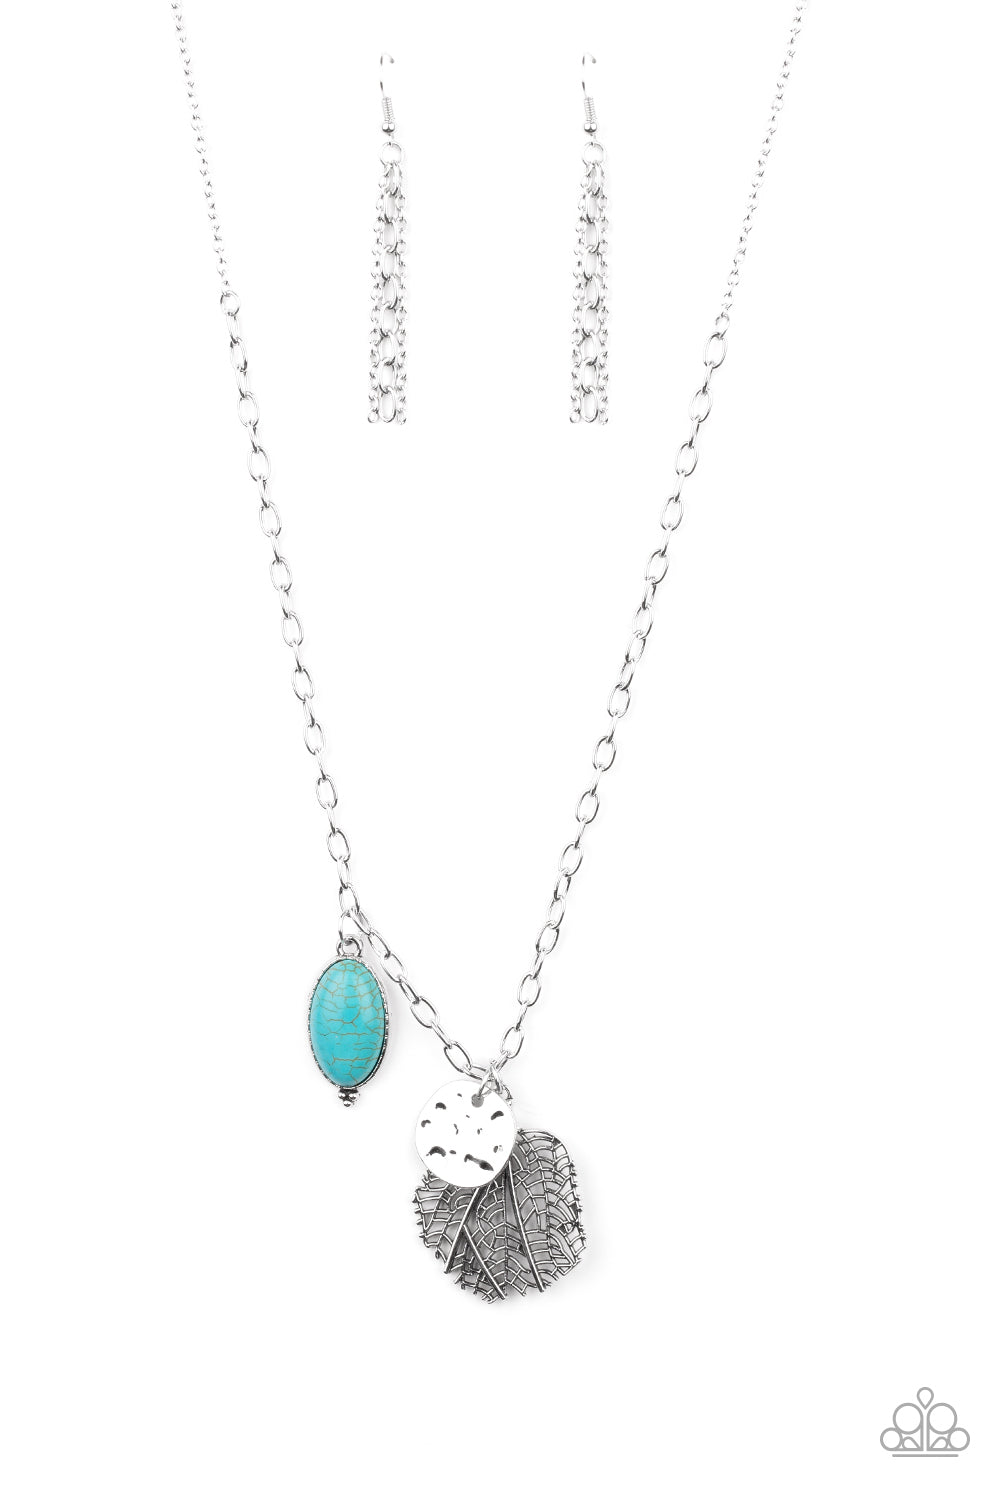 Free-Spirited Forager - blue necklace 665